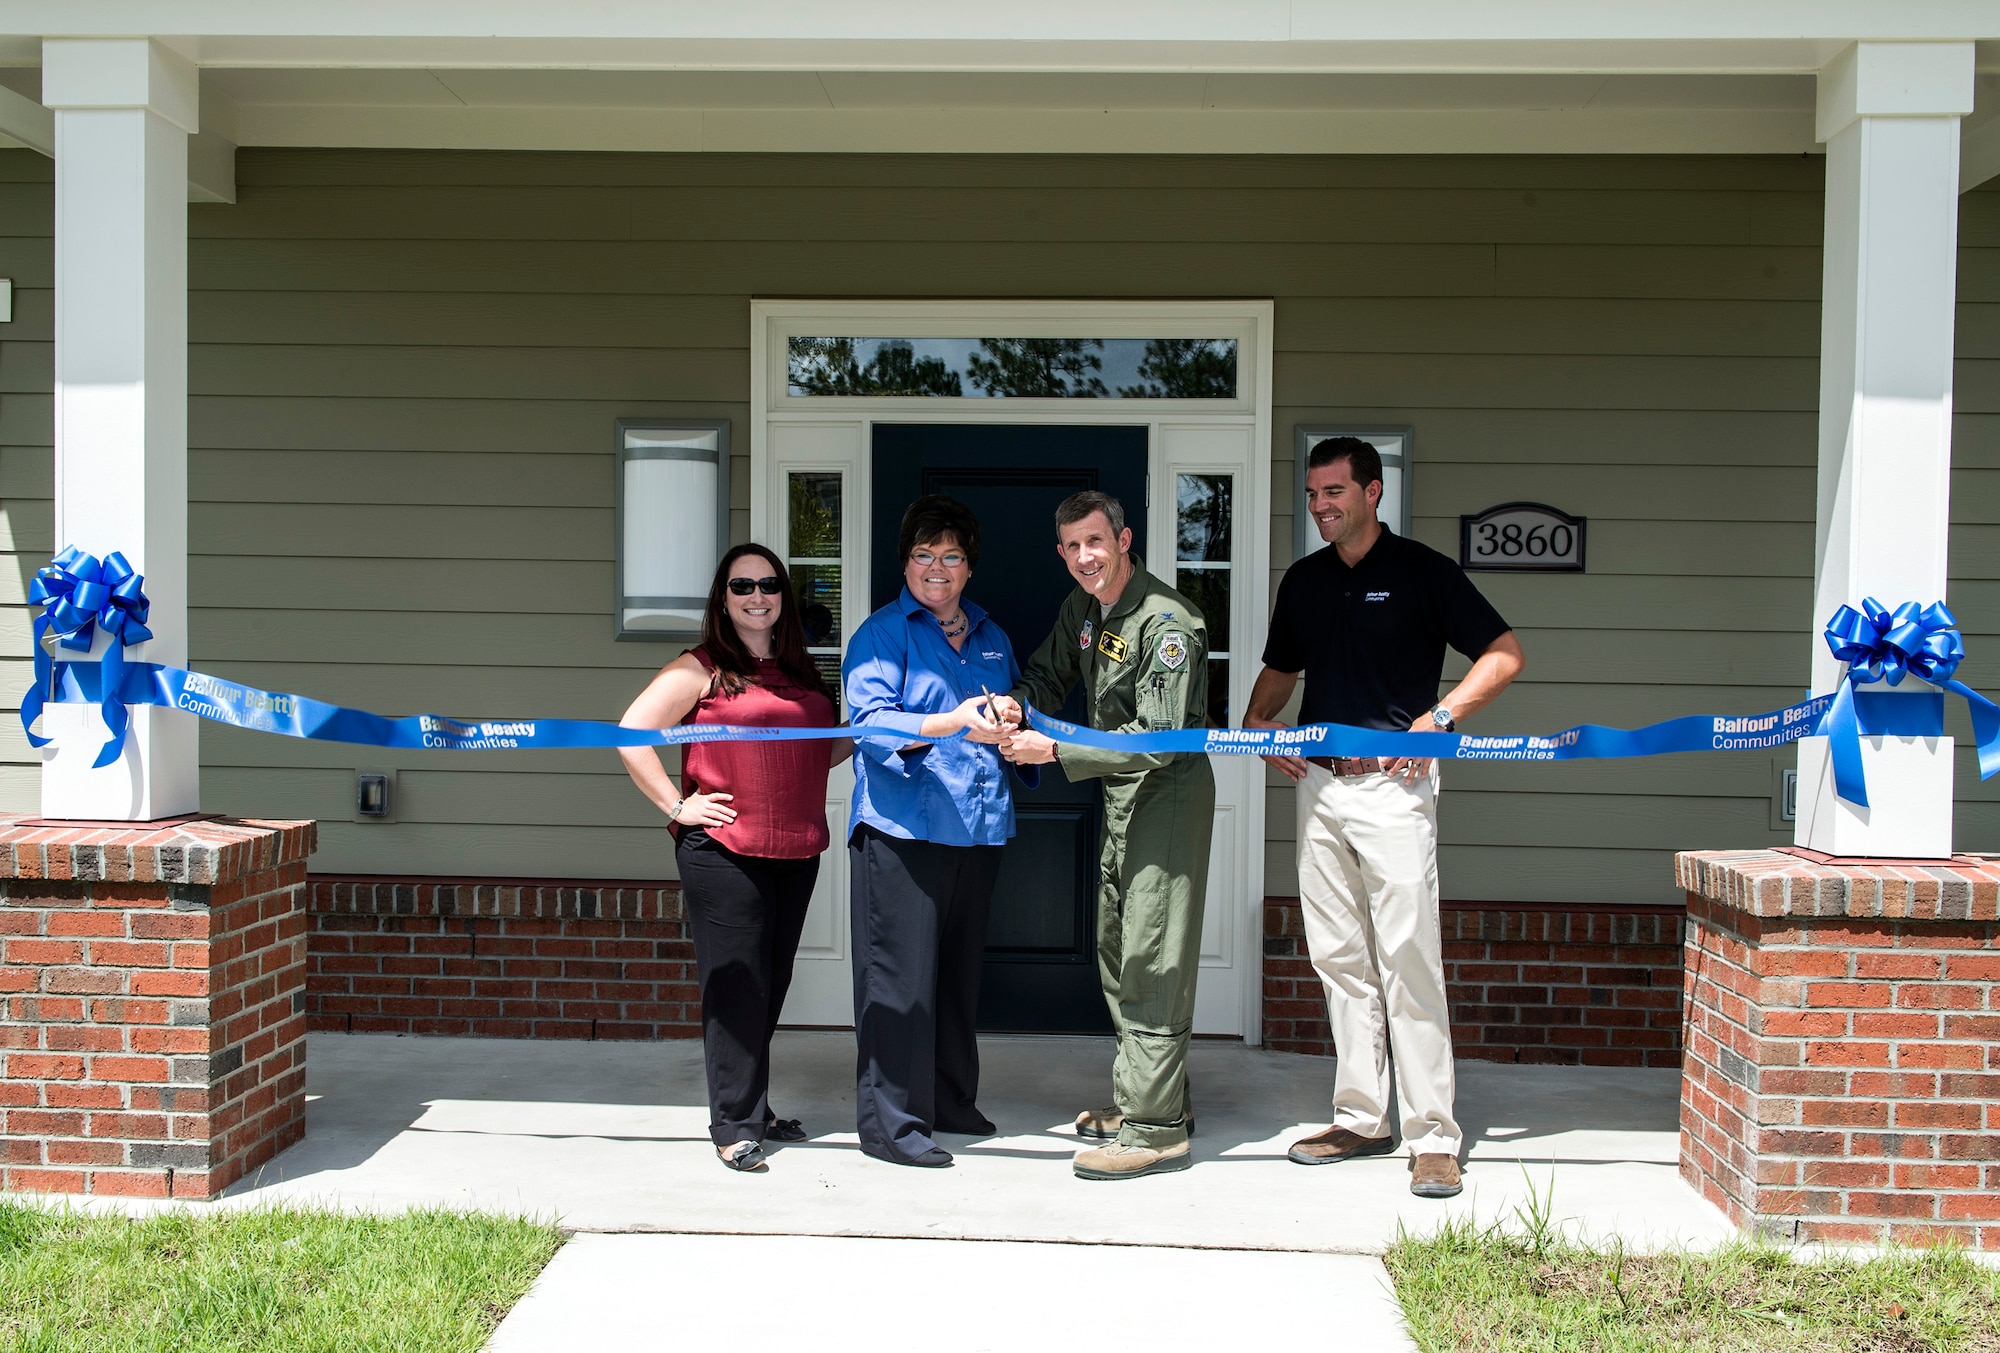 Devona Hathcock, center left, community manager for a local real estate company, and U.S. Air Force Col. Thomas Kunkel, center right, 23d Wing commander, cut a ribbon Aug. 12, 2016, in Valdosta, Ga. The ceremonial ribbon cutting celebrated the opening of the community center in the recently-opened Azalea Commons housing area. After the ceremonial ribbon cutting, attendees were served barbeque, toured the new community center and took a dip in the pool. (U.S. Air Force photo by Airman 1st Class Janiqua P. Robinson)